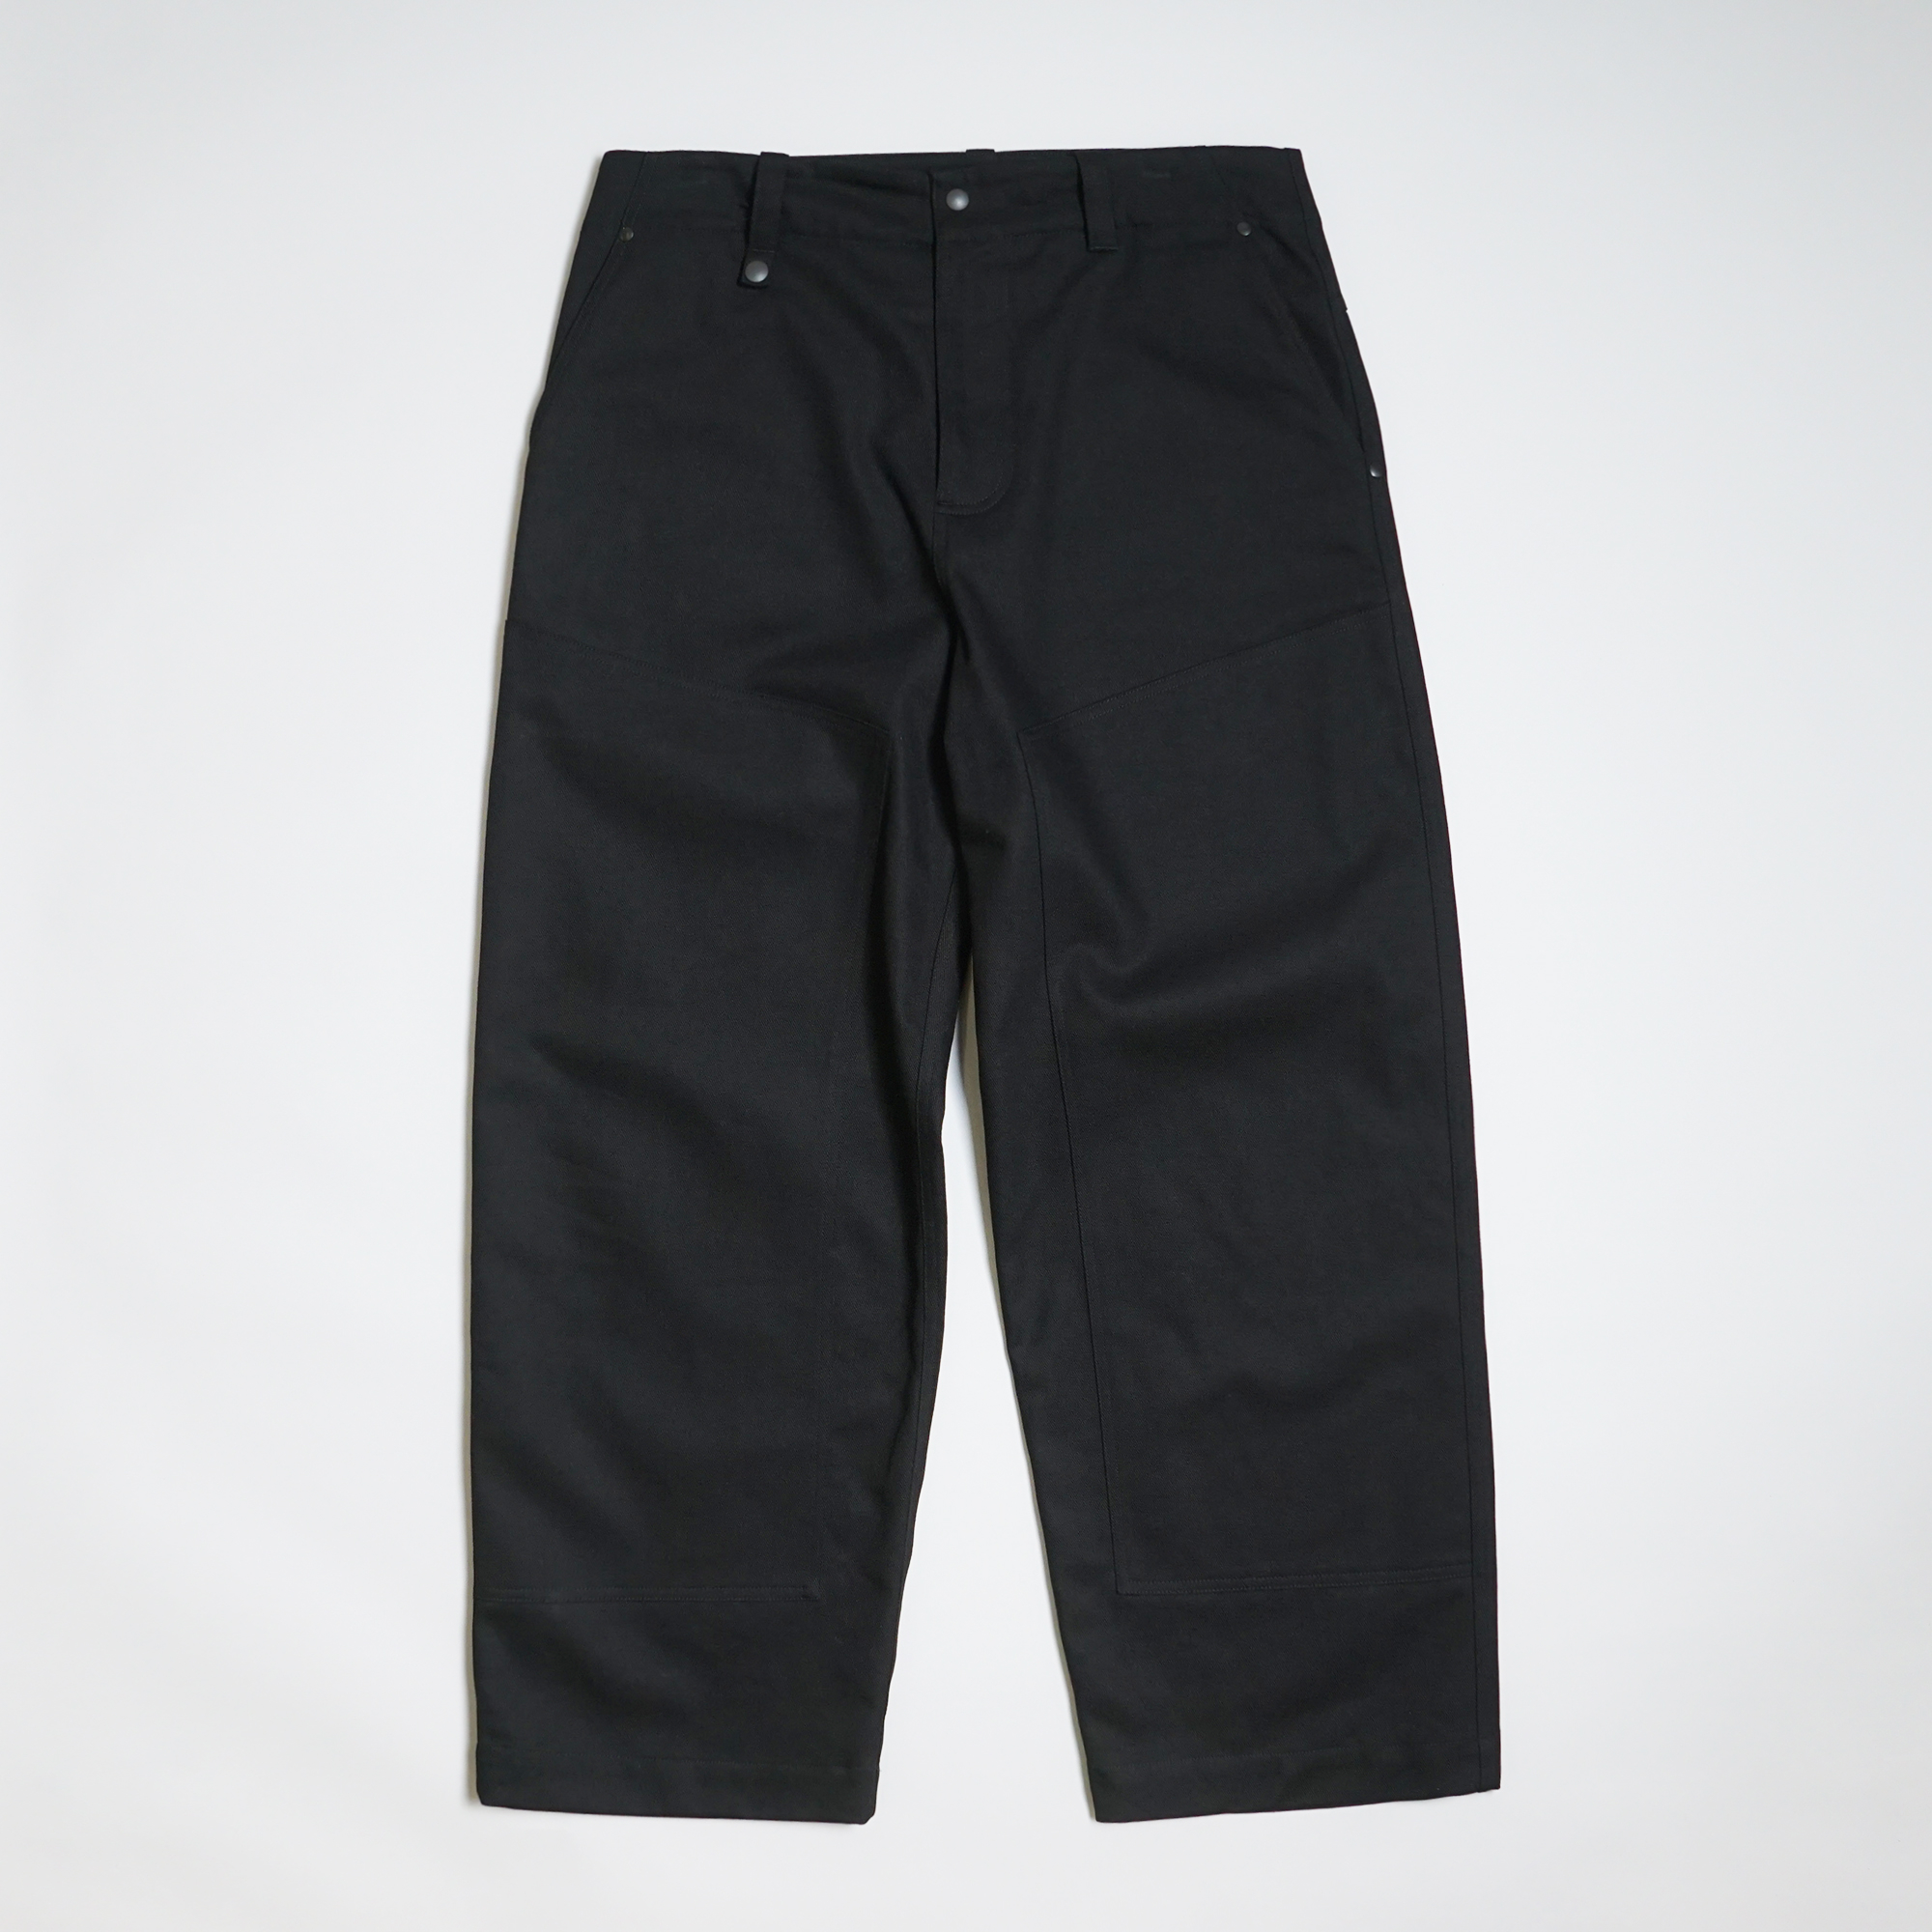 Day Pants in Black color by Arpenteur by C'H'C'M'